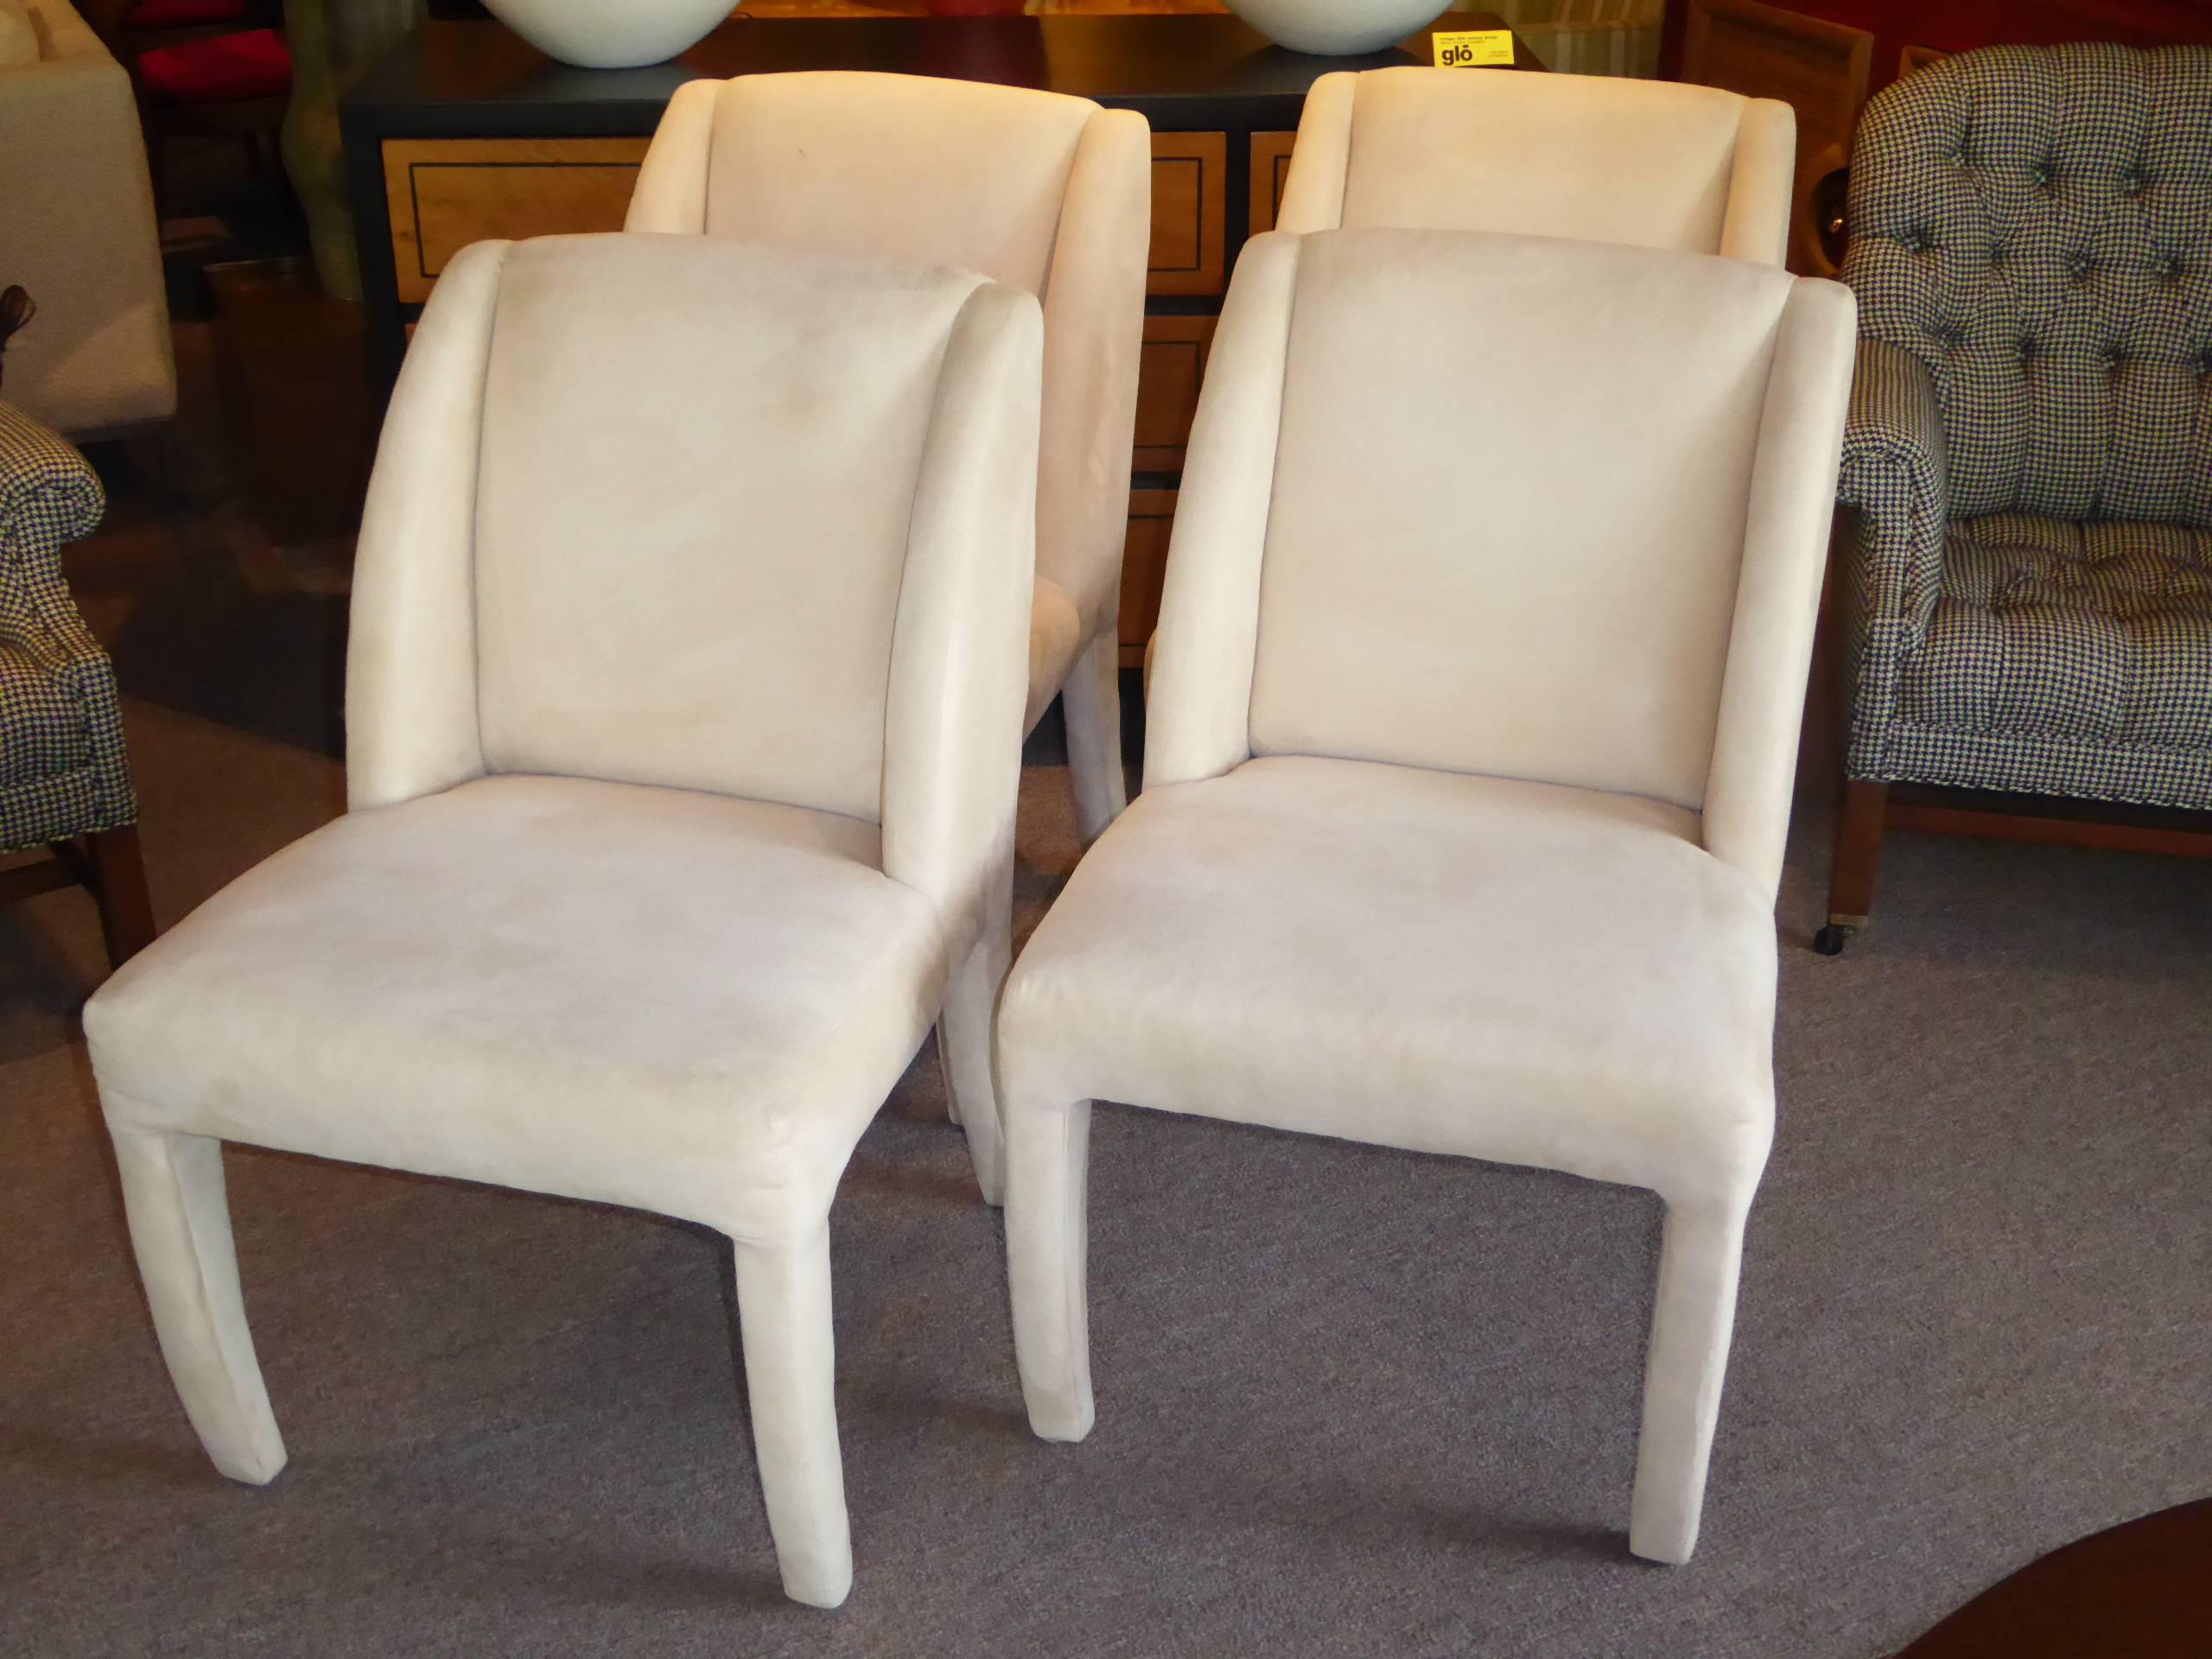 1980s Luxe Modern Ultrasuede Dining Chairs by Directional (Moderne)